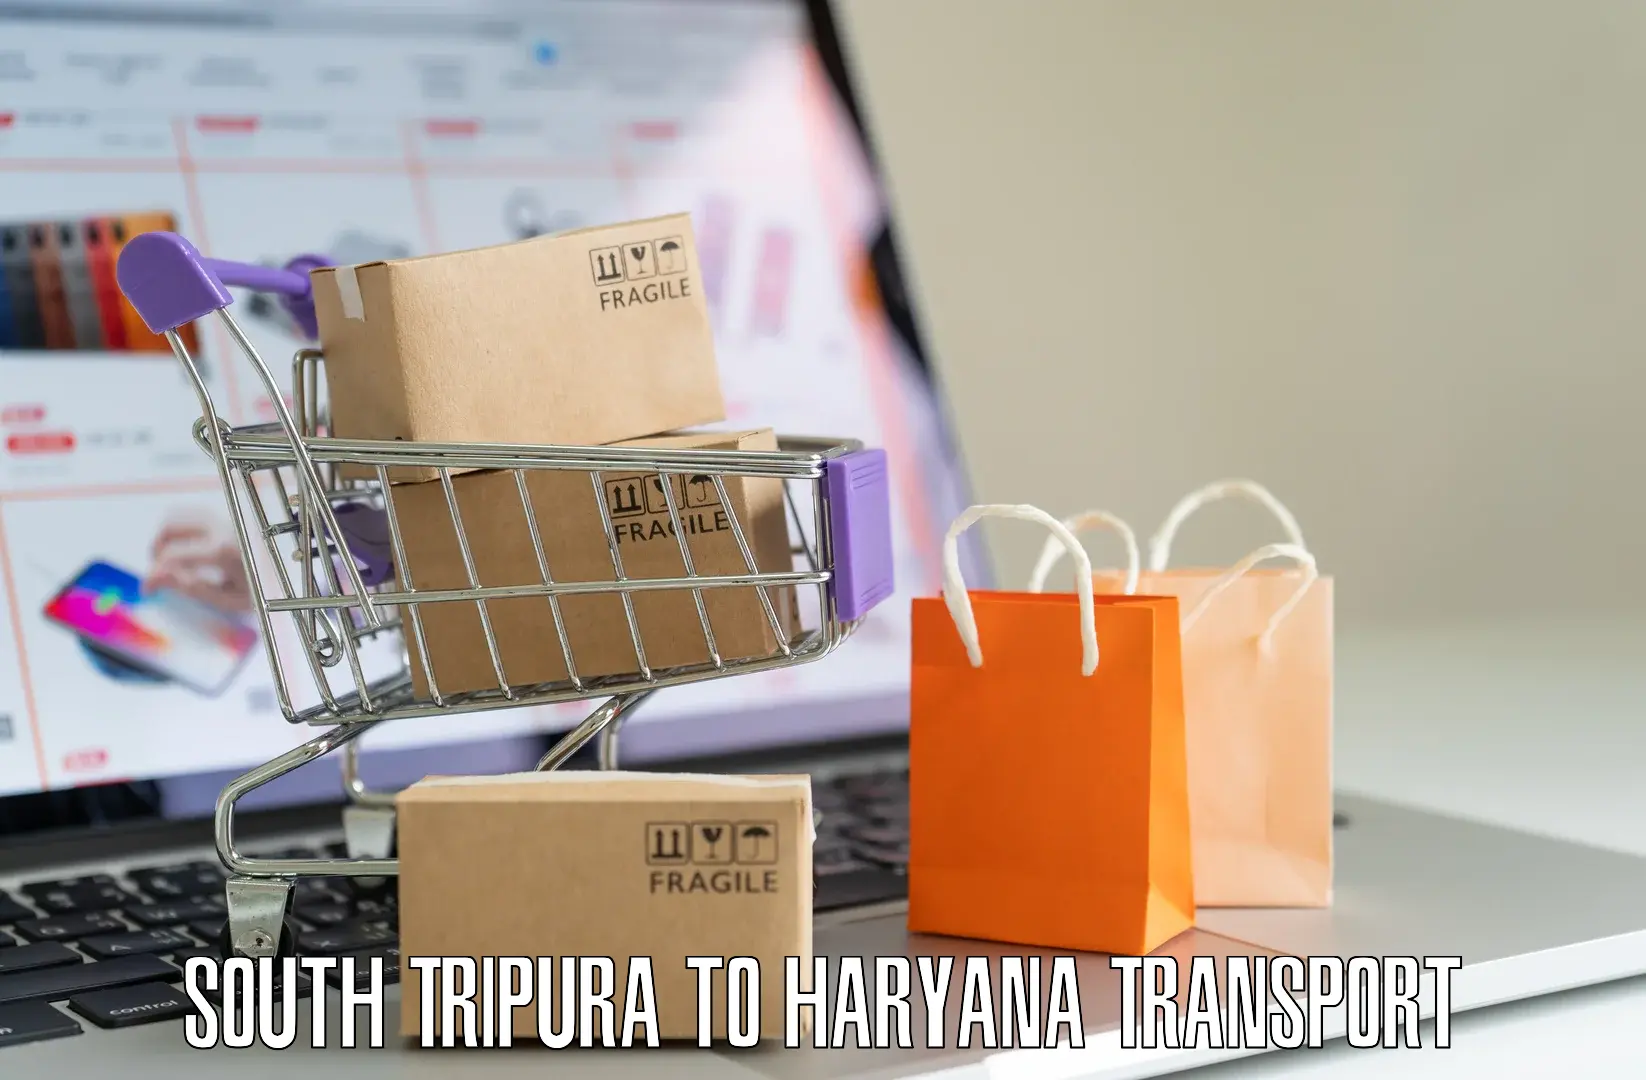 Transport shared services South Tripura to Sonipat